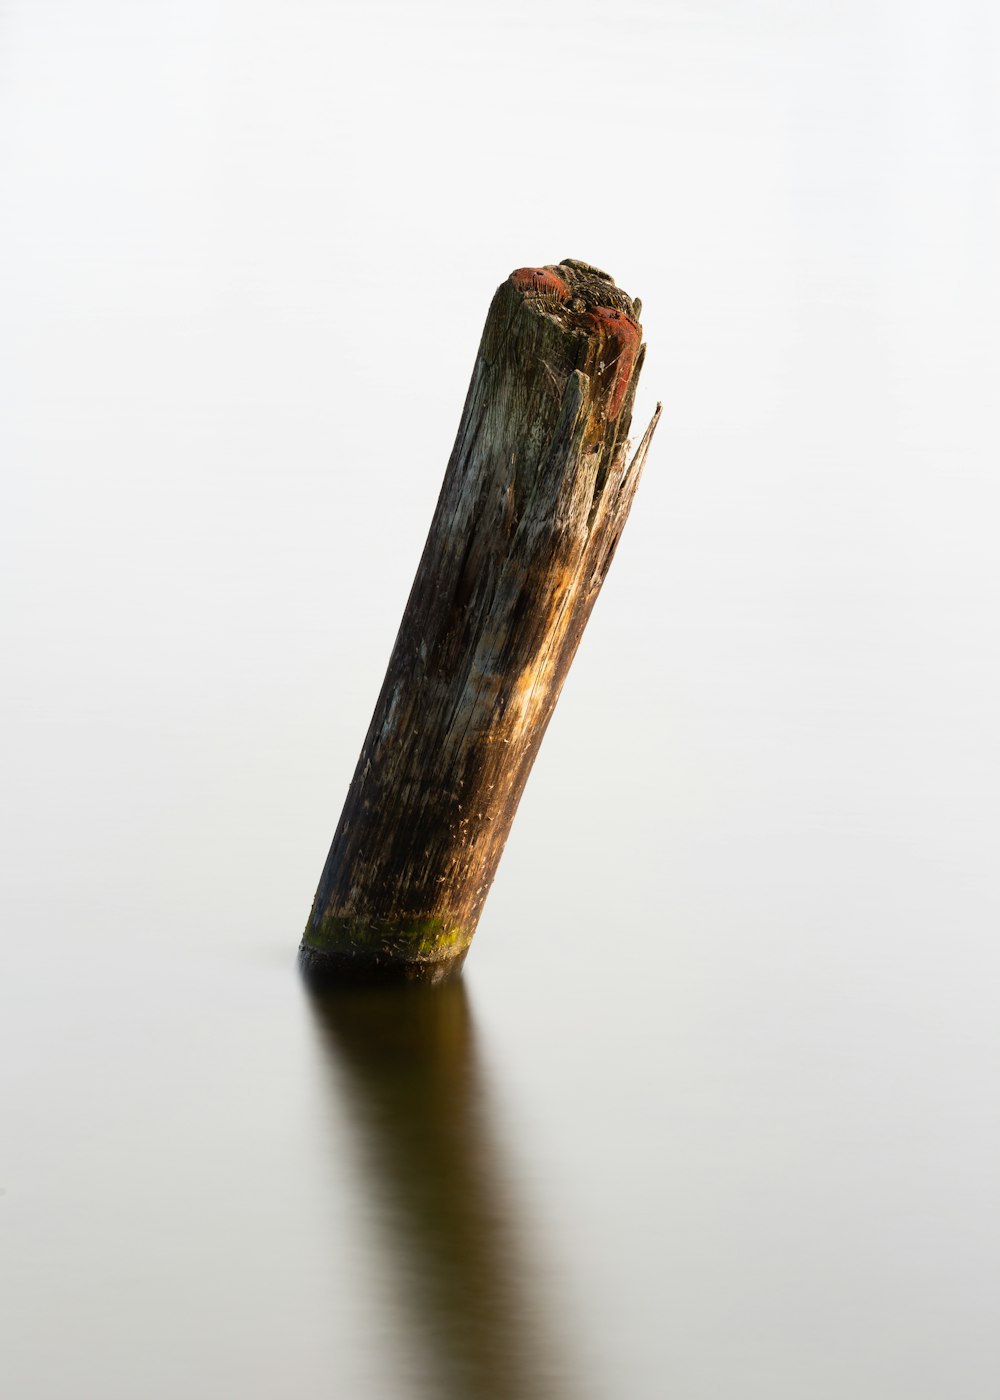 brown wooden stick in body of water